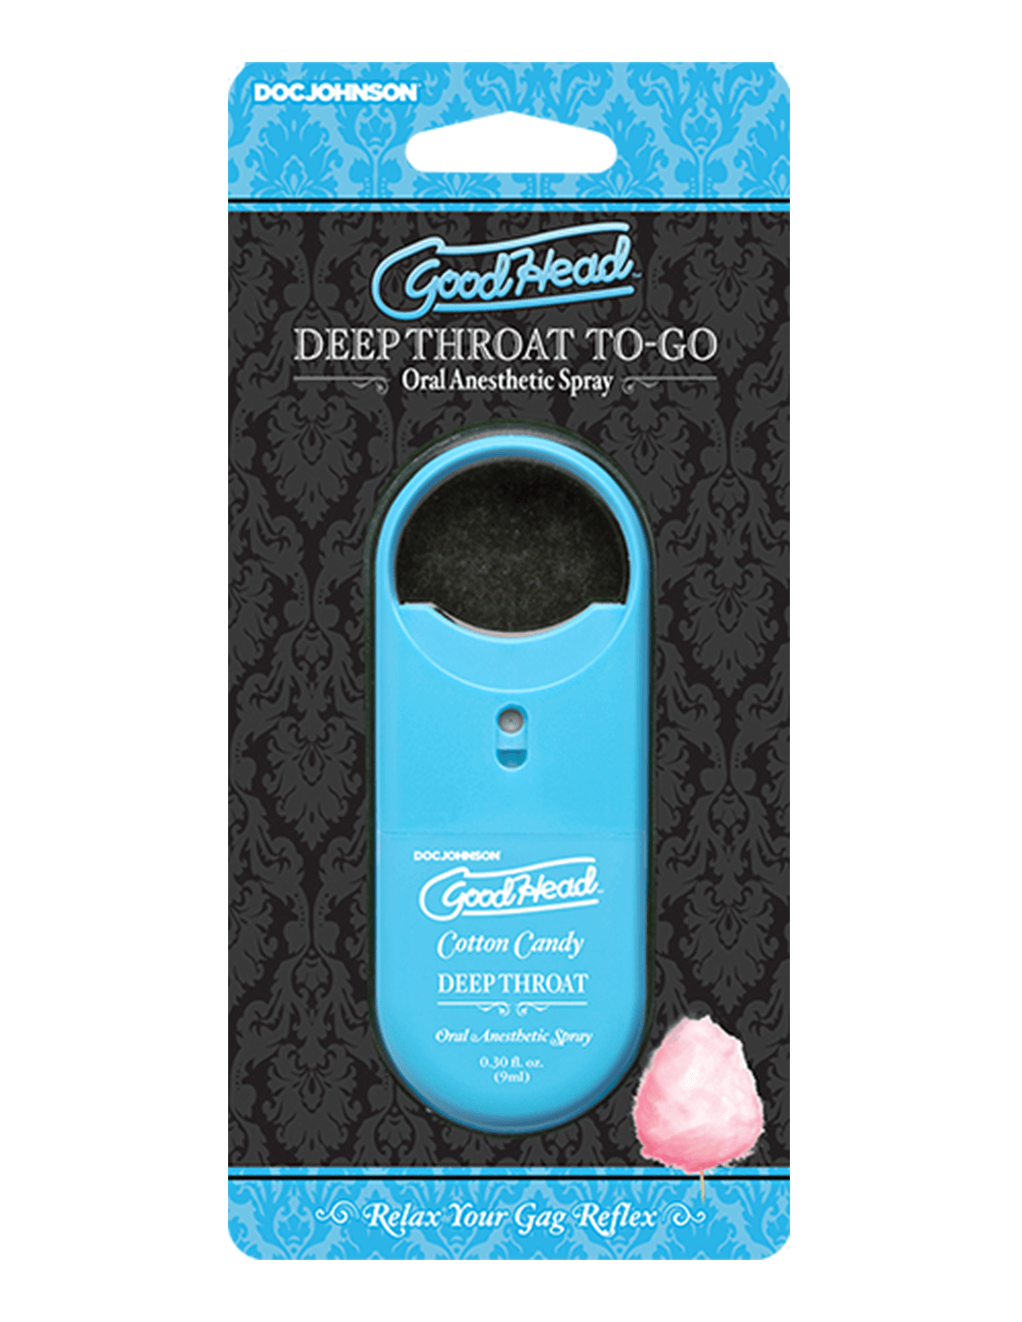 GoodHead Deep Throat To Go Spray - Cotton Candy - Package